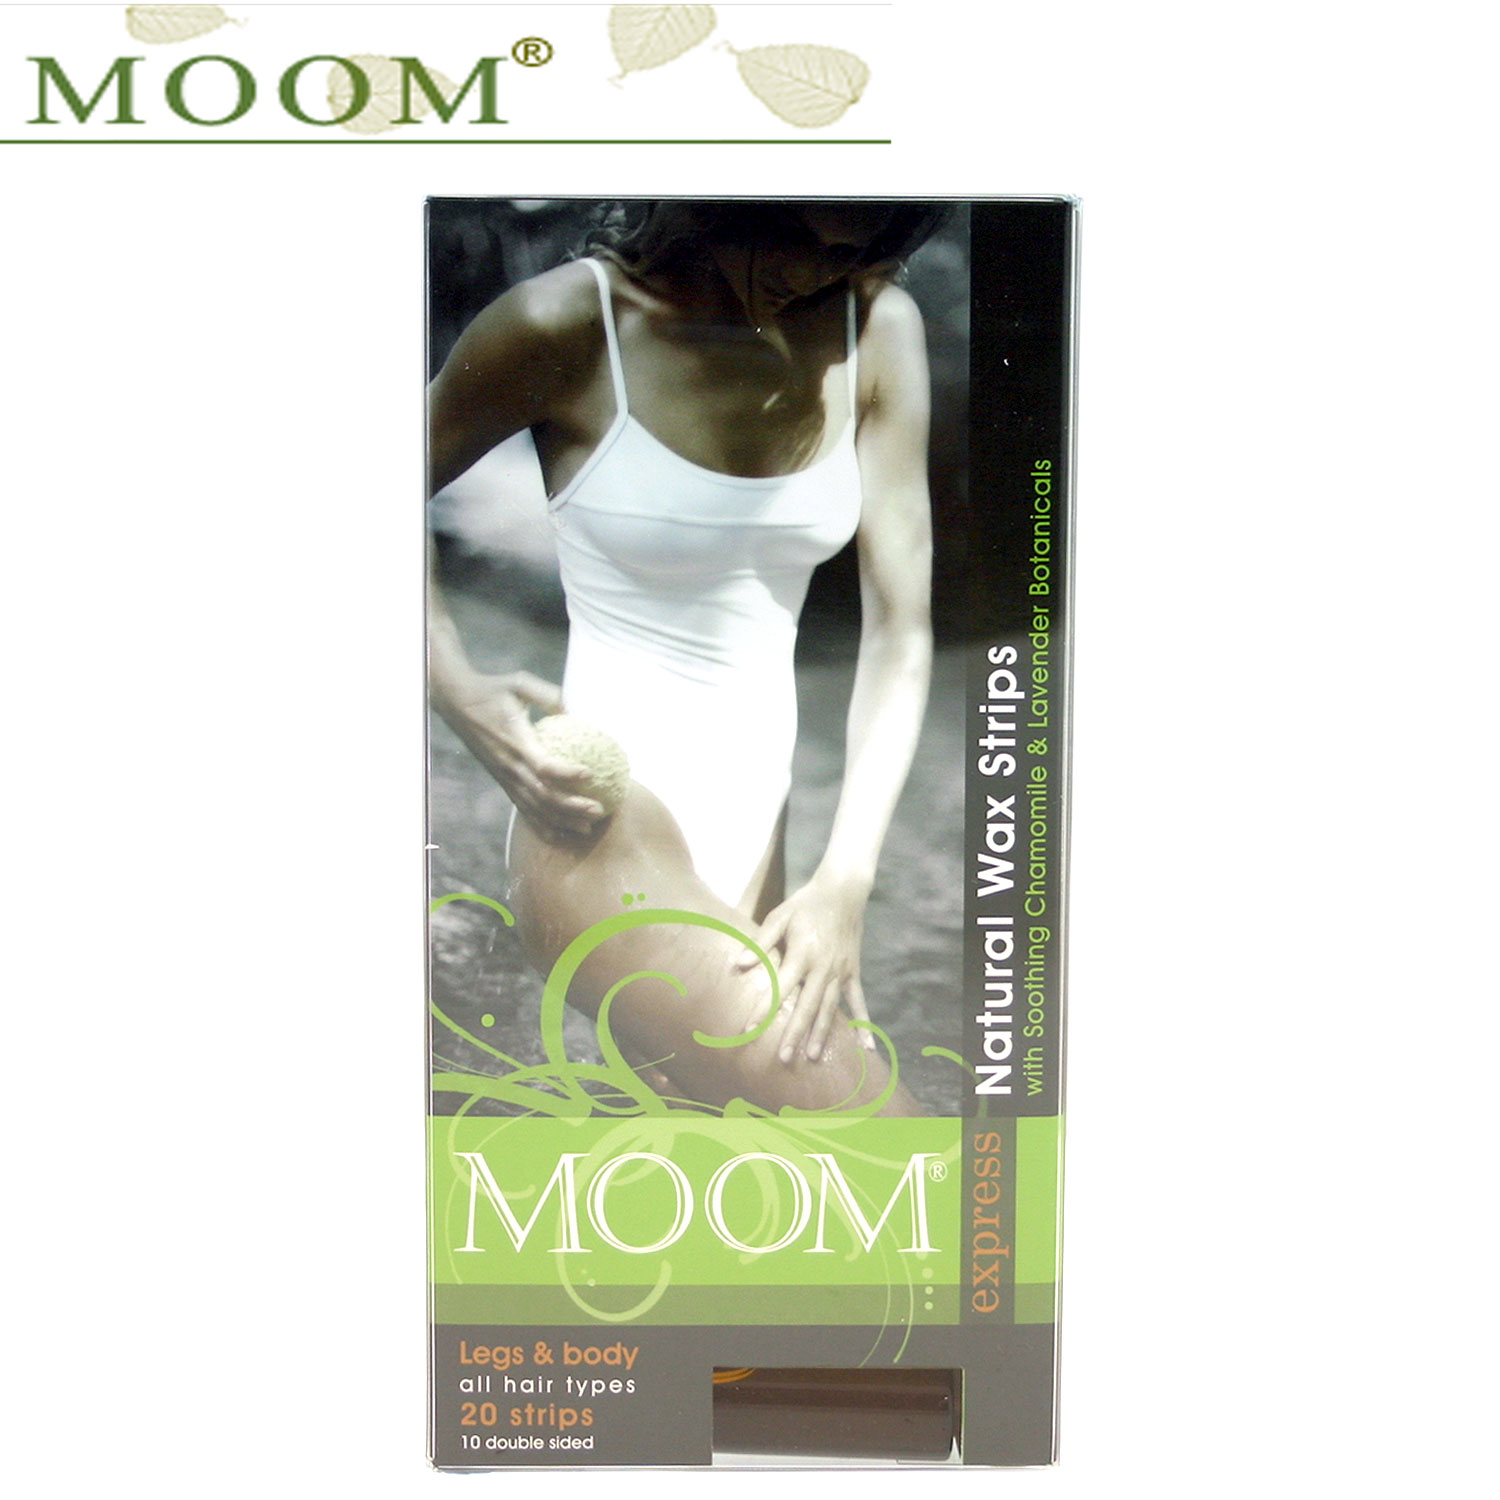 MOOM Express Legs and Body Natural Wax Strips